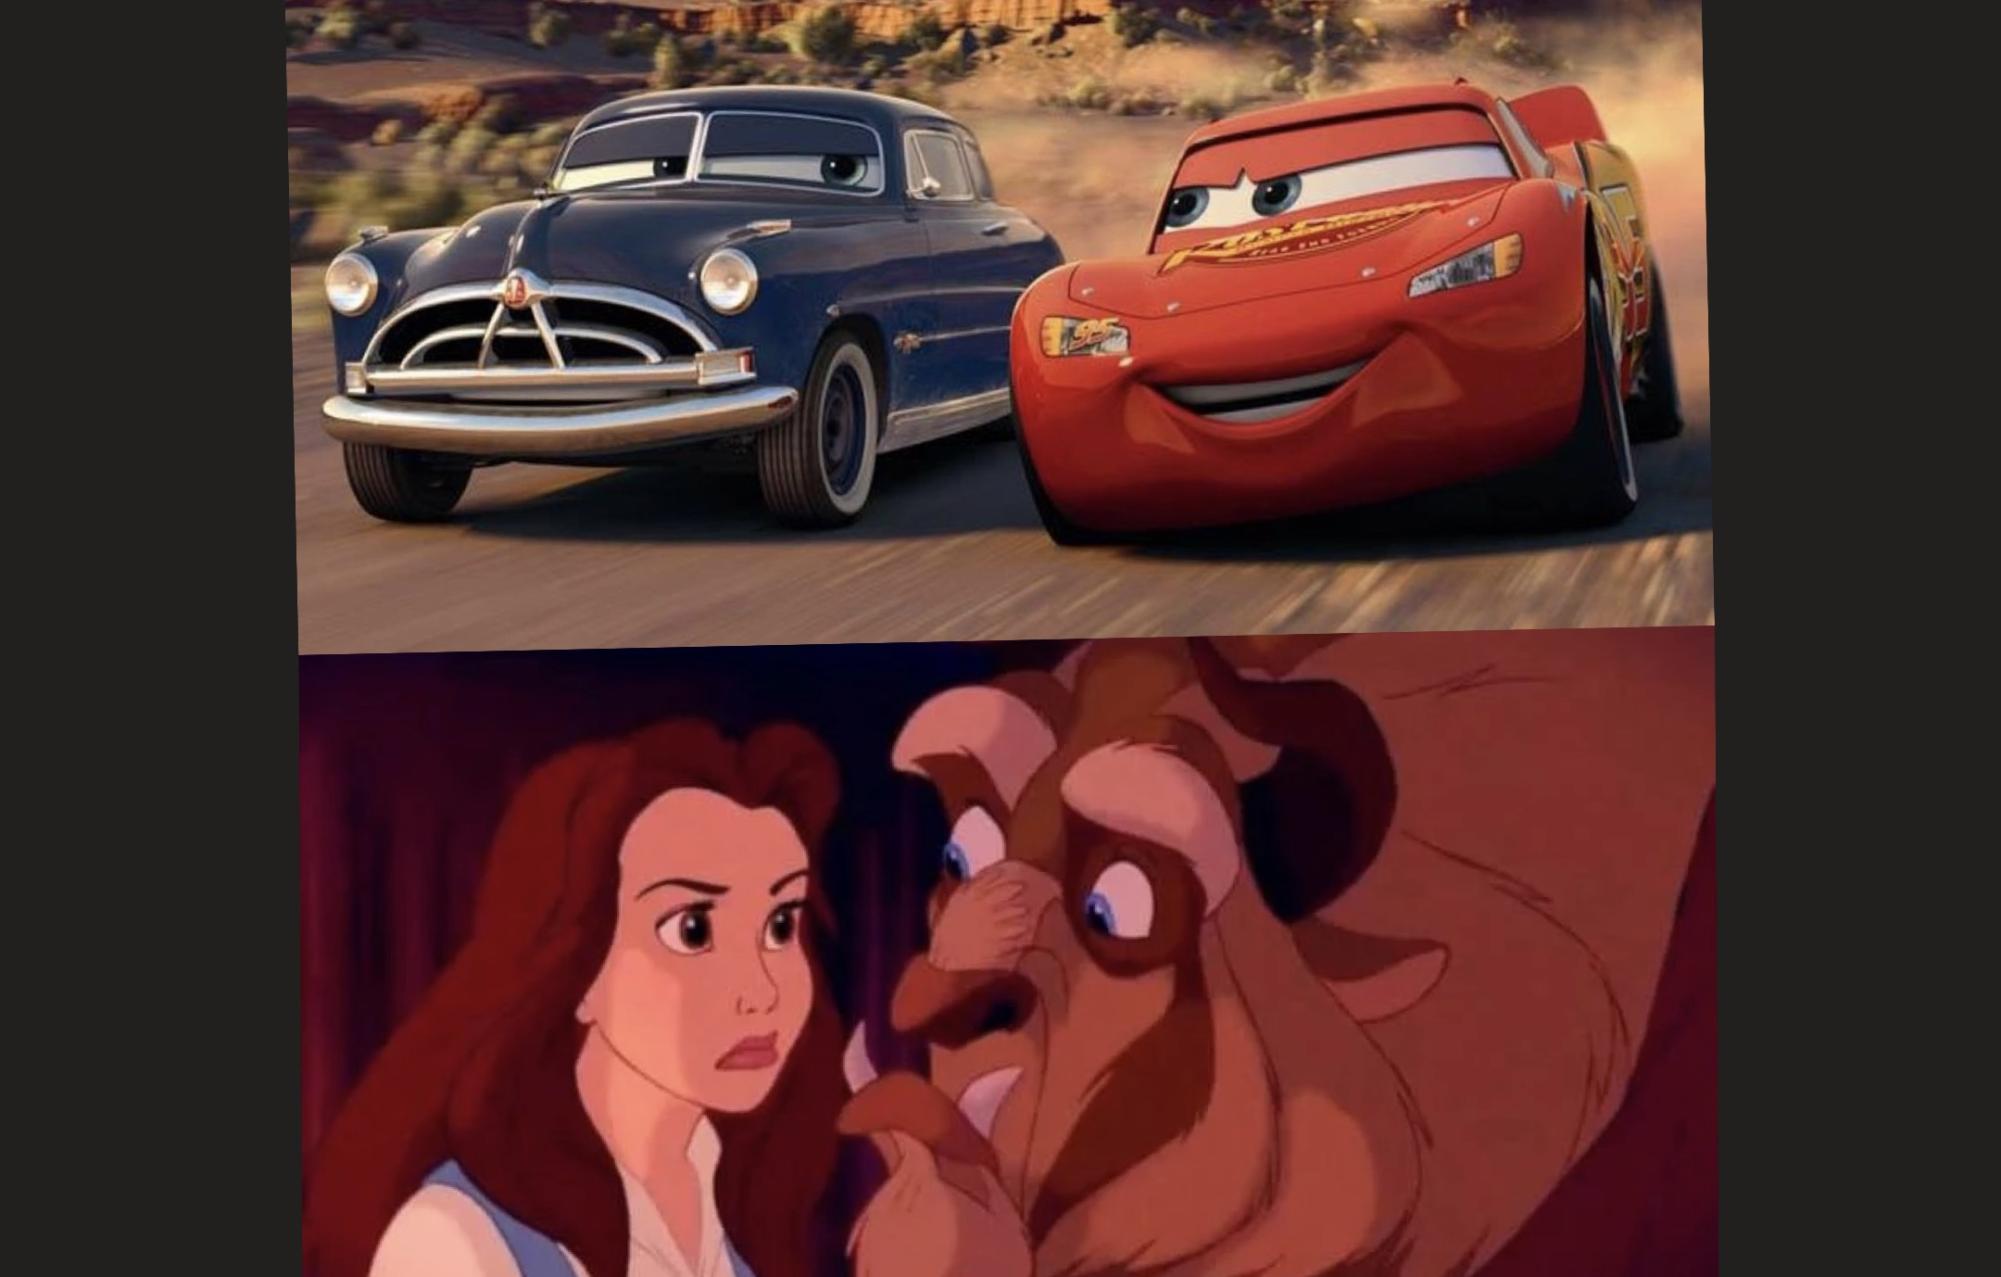 Cars and Beauty and the Beast showcase impressive symbolism.